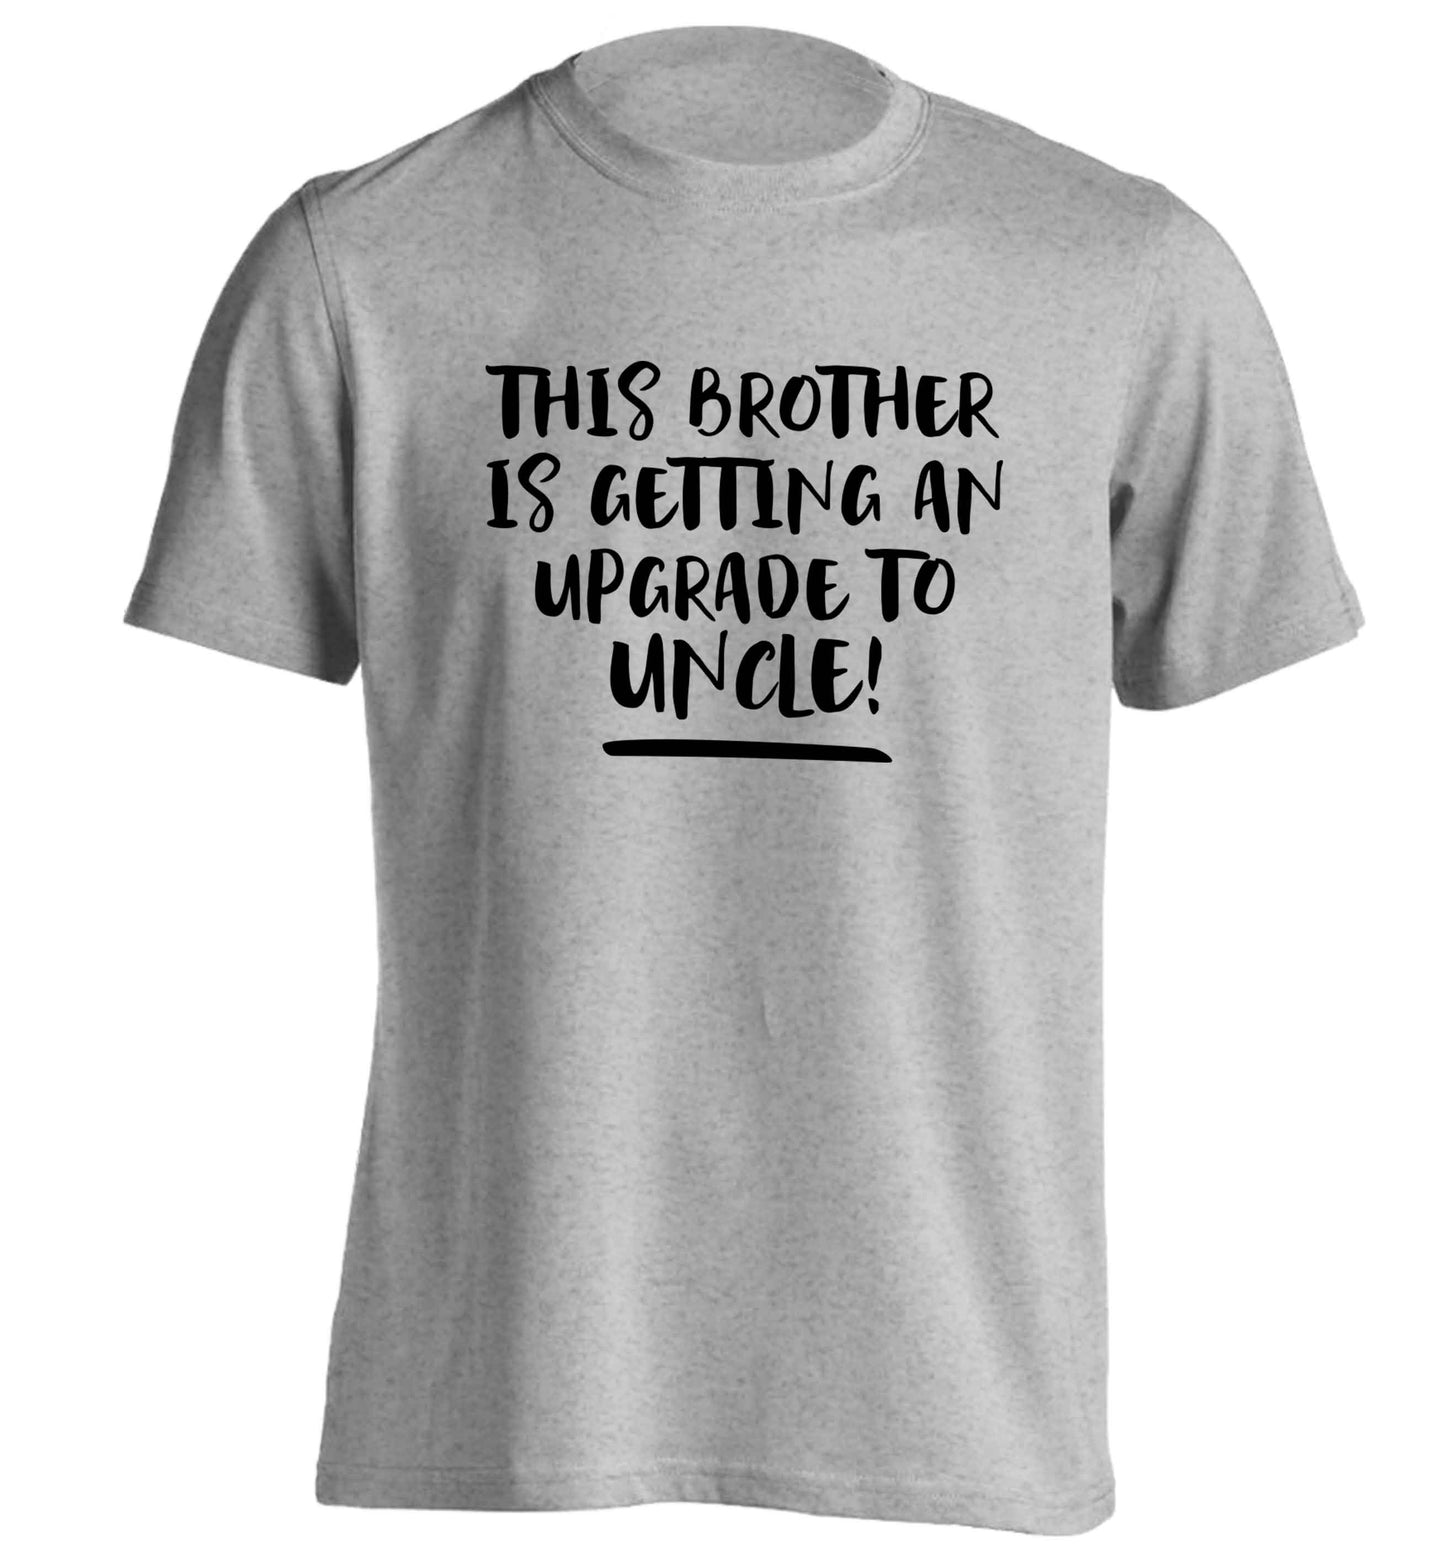 This brother is getting an upgrade to uncle! adults unisex grey Tshirt 2XL